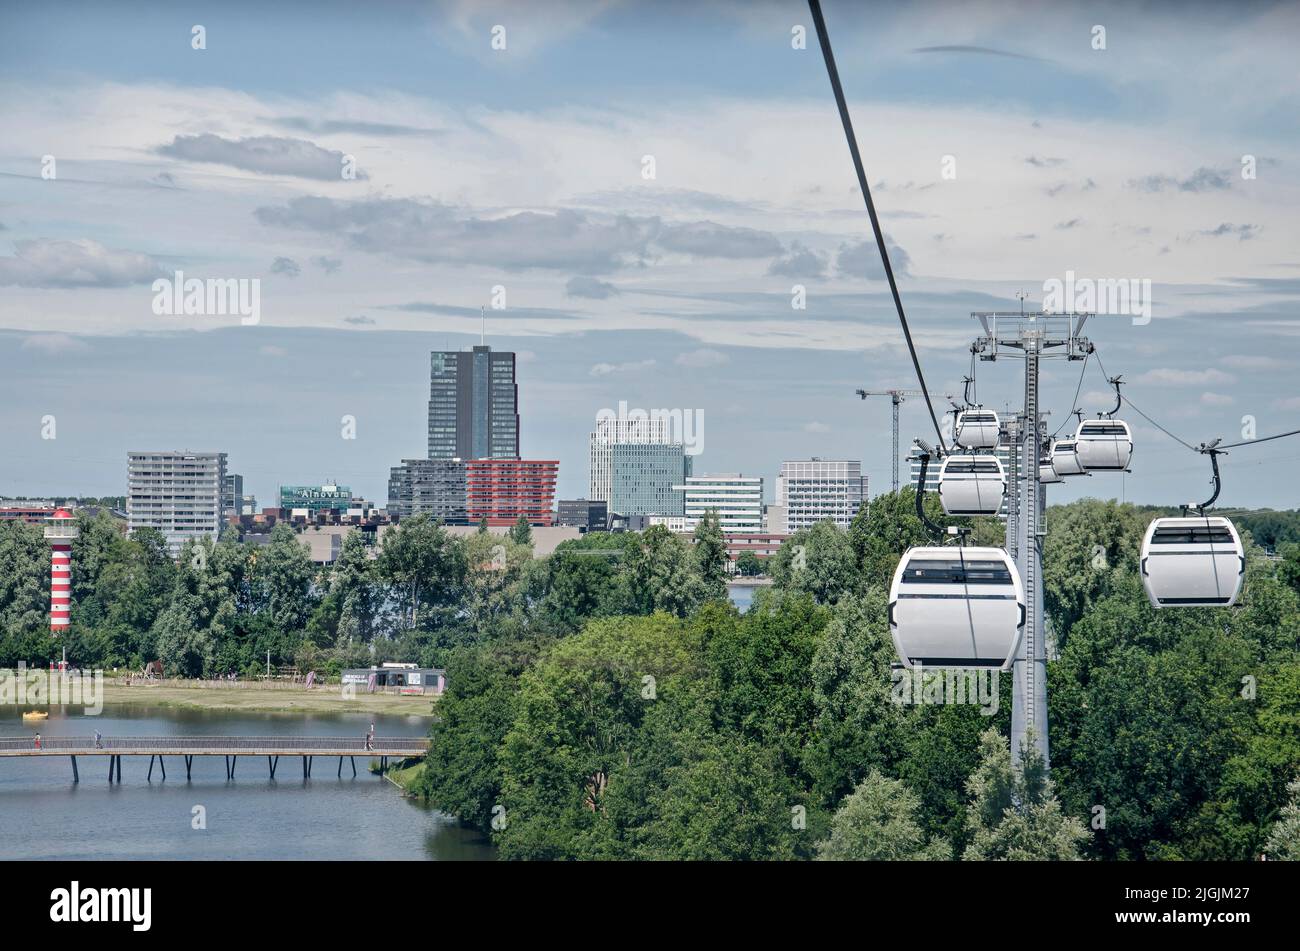 Almere, The Netherlands, July 6, 2022: view from a ropeway gondola over the Floriade expo with the city center in the background Stock Photo